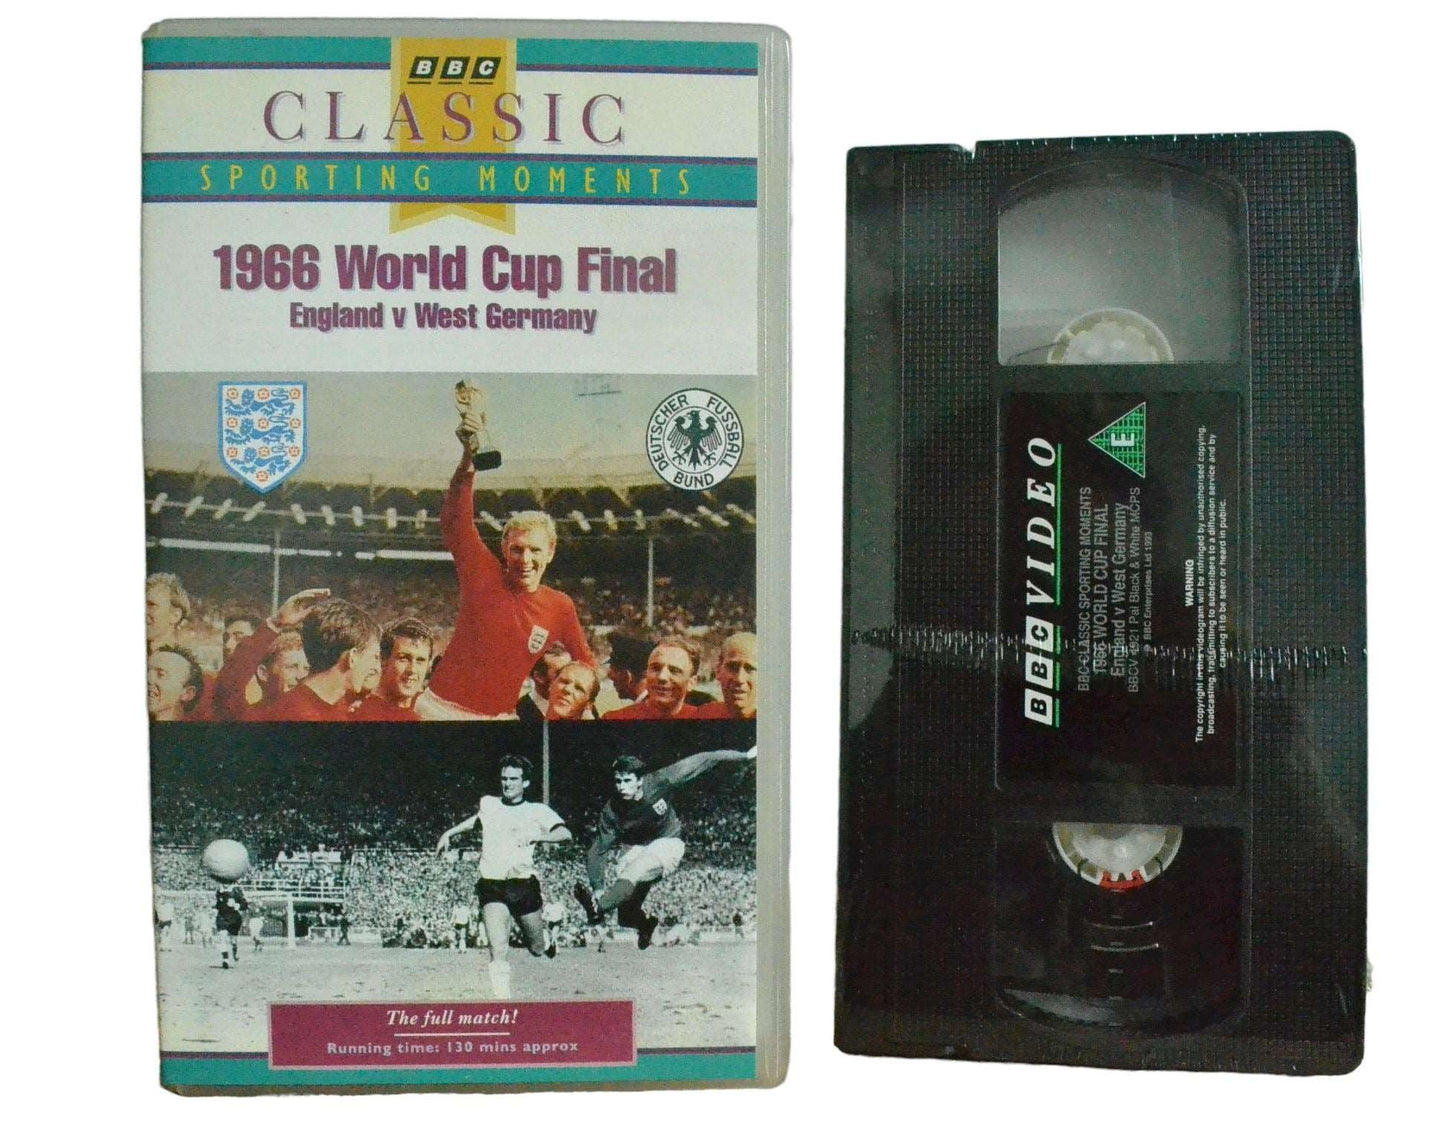 1966 Final World Cup (England v West Germany) - BBC Video - Brand New Sealed - Pal VHS-